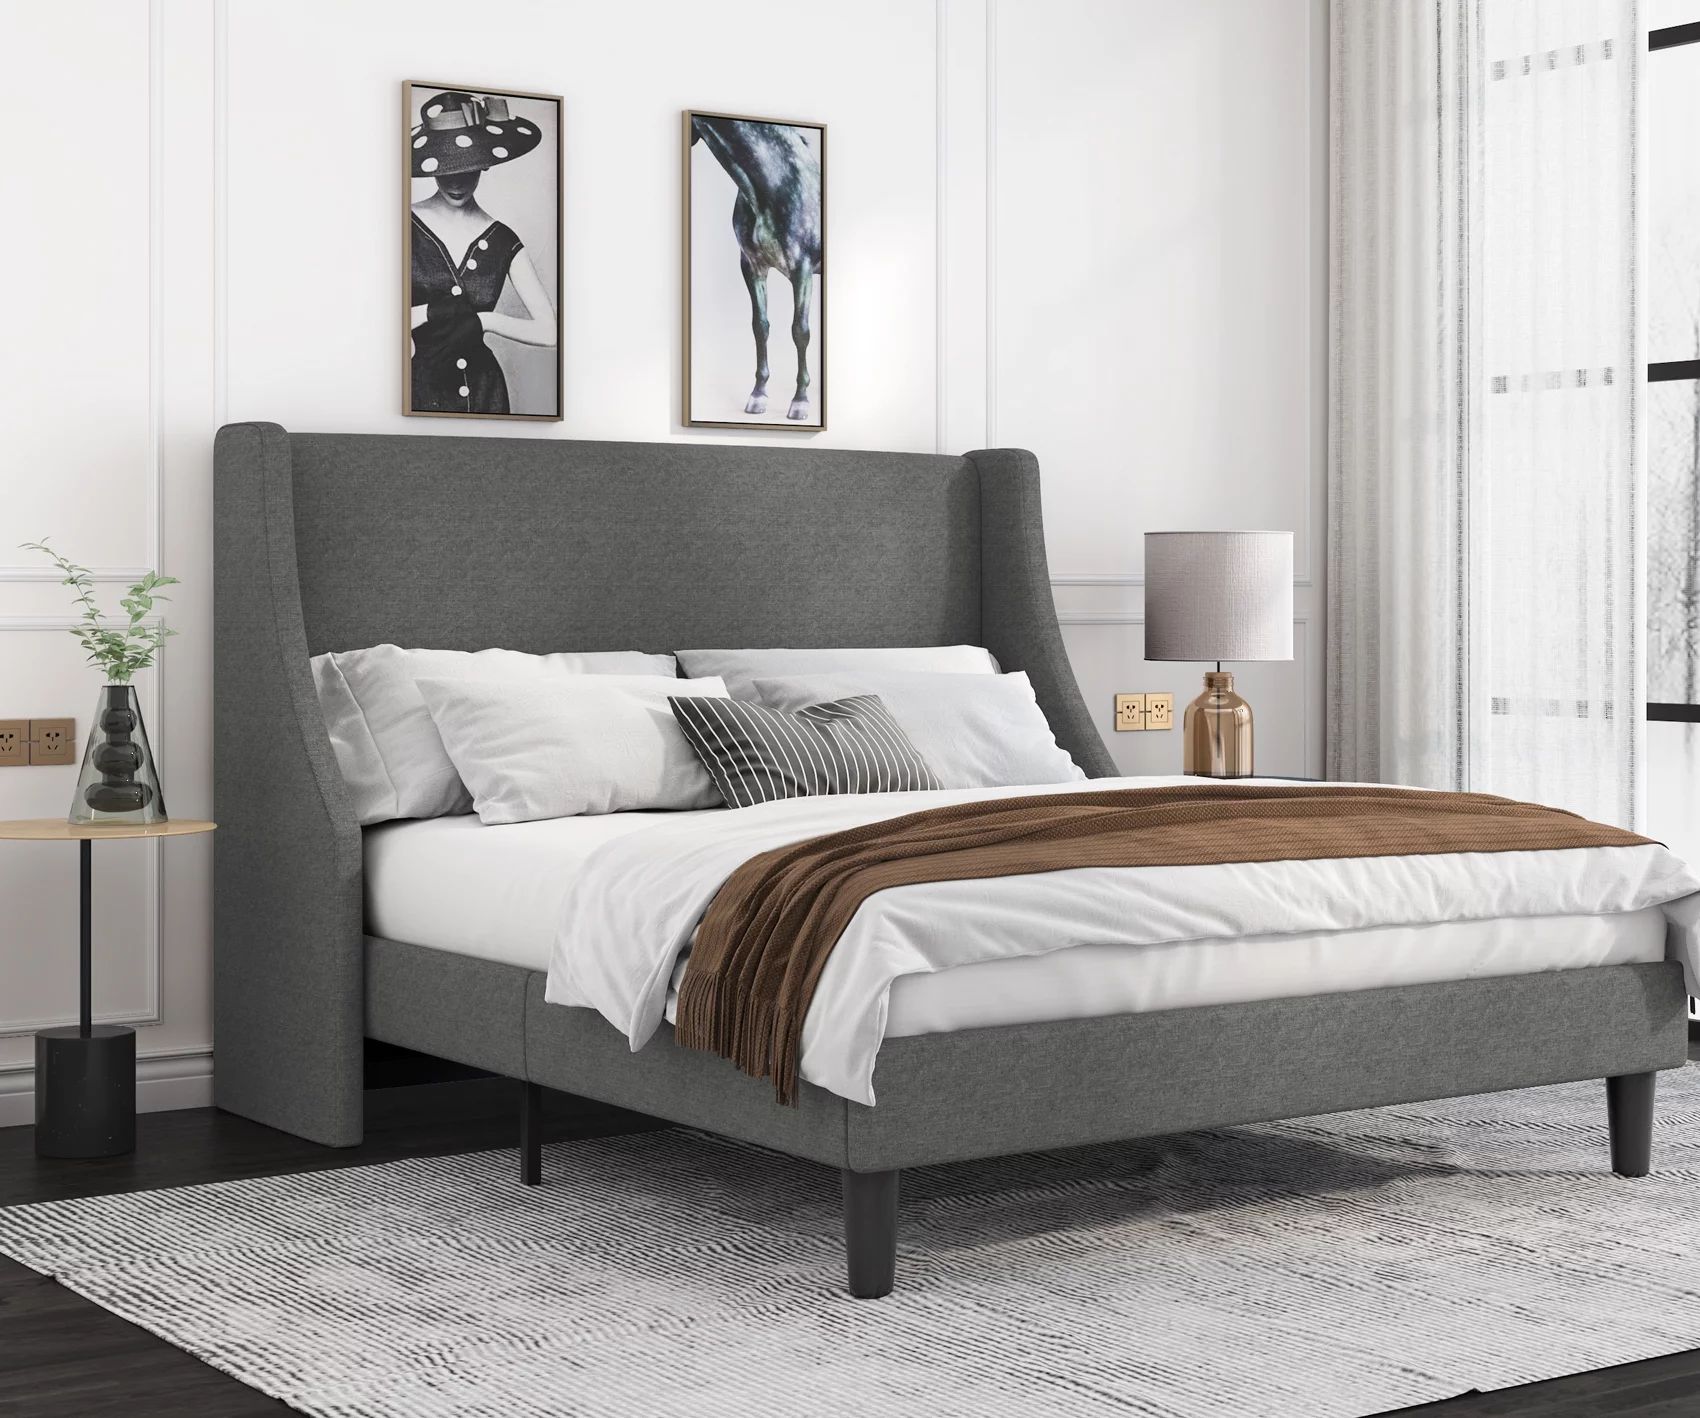 Allewie Full Size Fabric Upholstered Platform Bed Frame with Wingback Headboard, Light Grey - Wal... | Walmart (US)